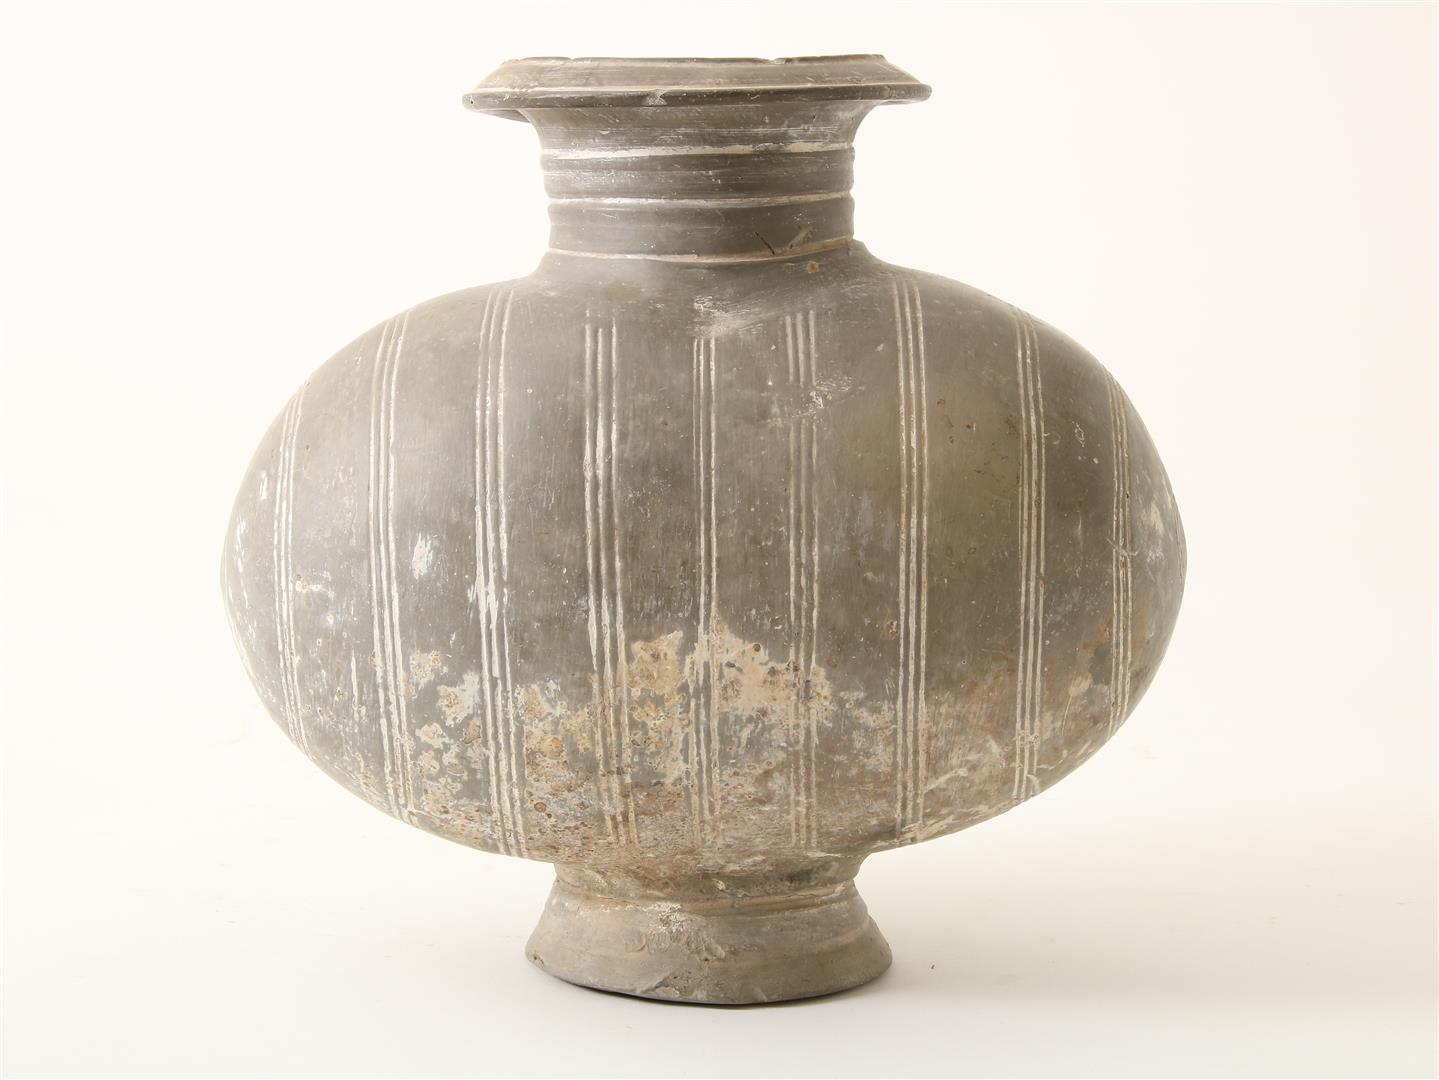 China, earthenware cocoon jar, Han dynasty ( 206 BC - 220 AD) The gray vessel moulded with